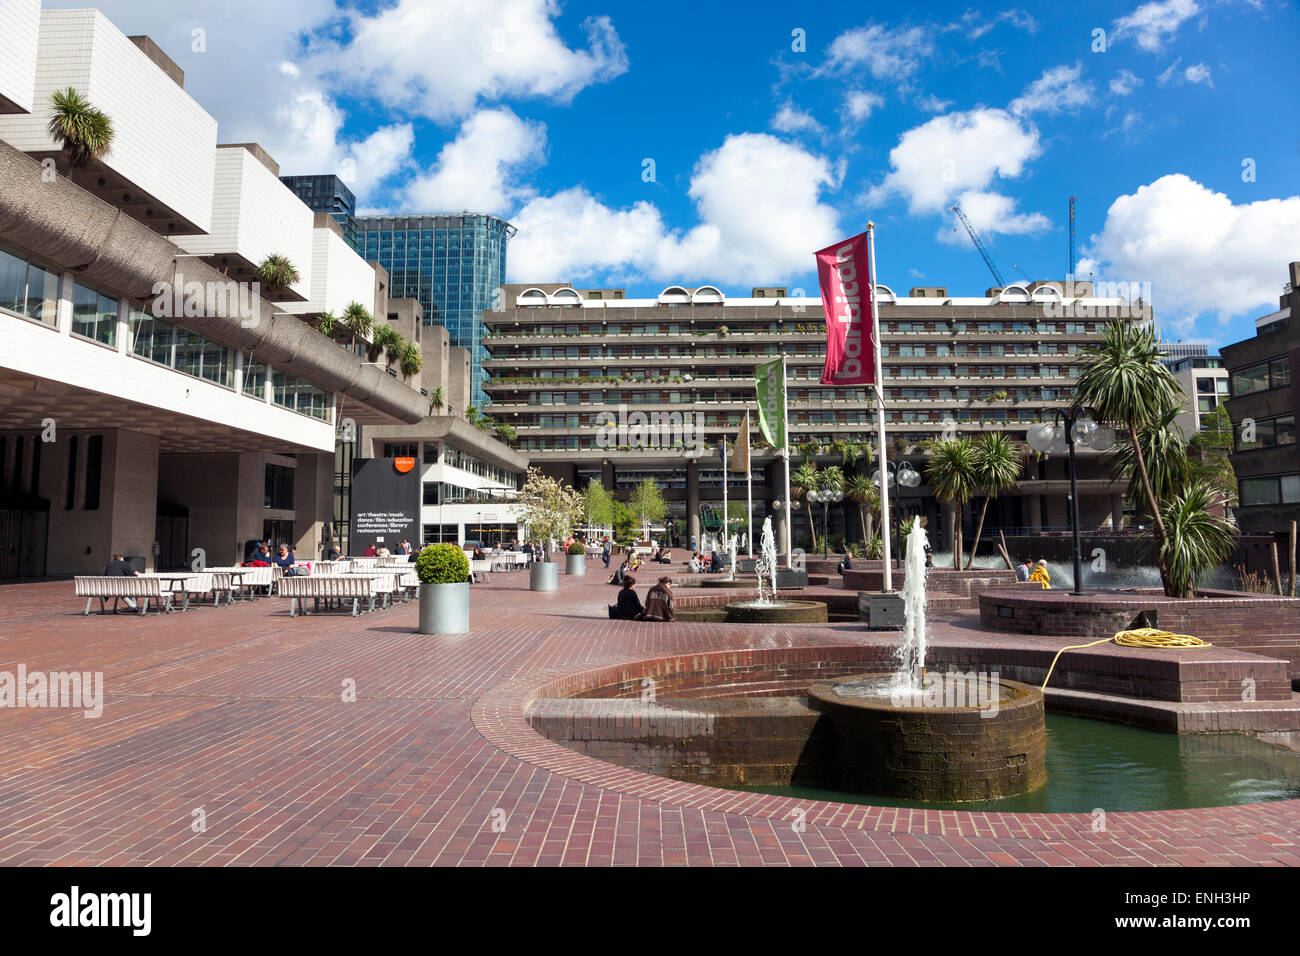 Lakeside Terrace in front of Barbican Center in the Barbican Estate, London, United Kingdom Stock Photo